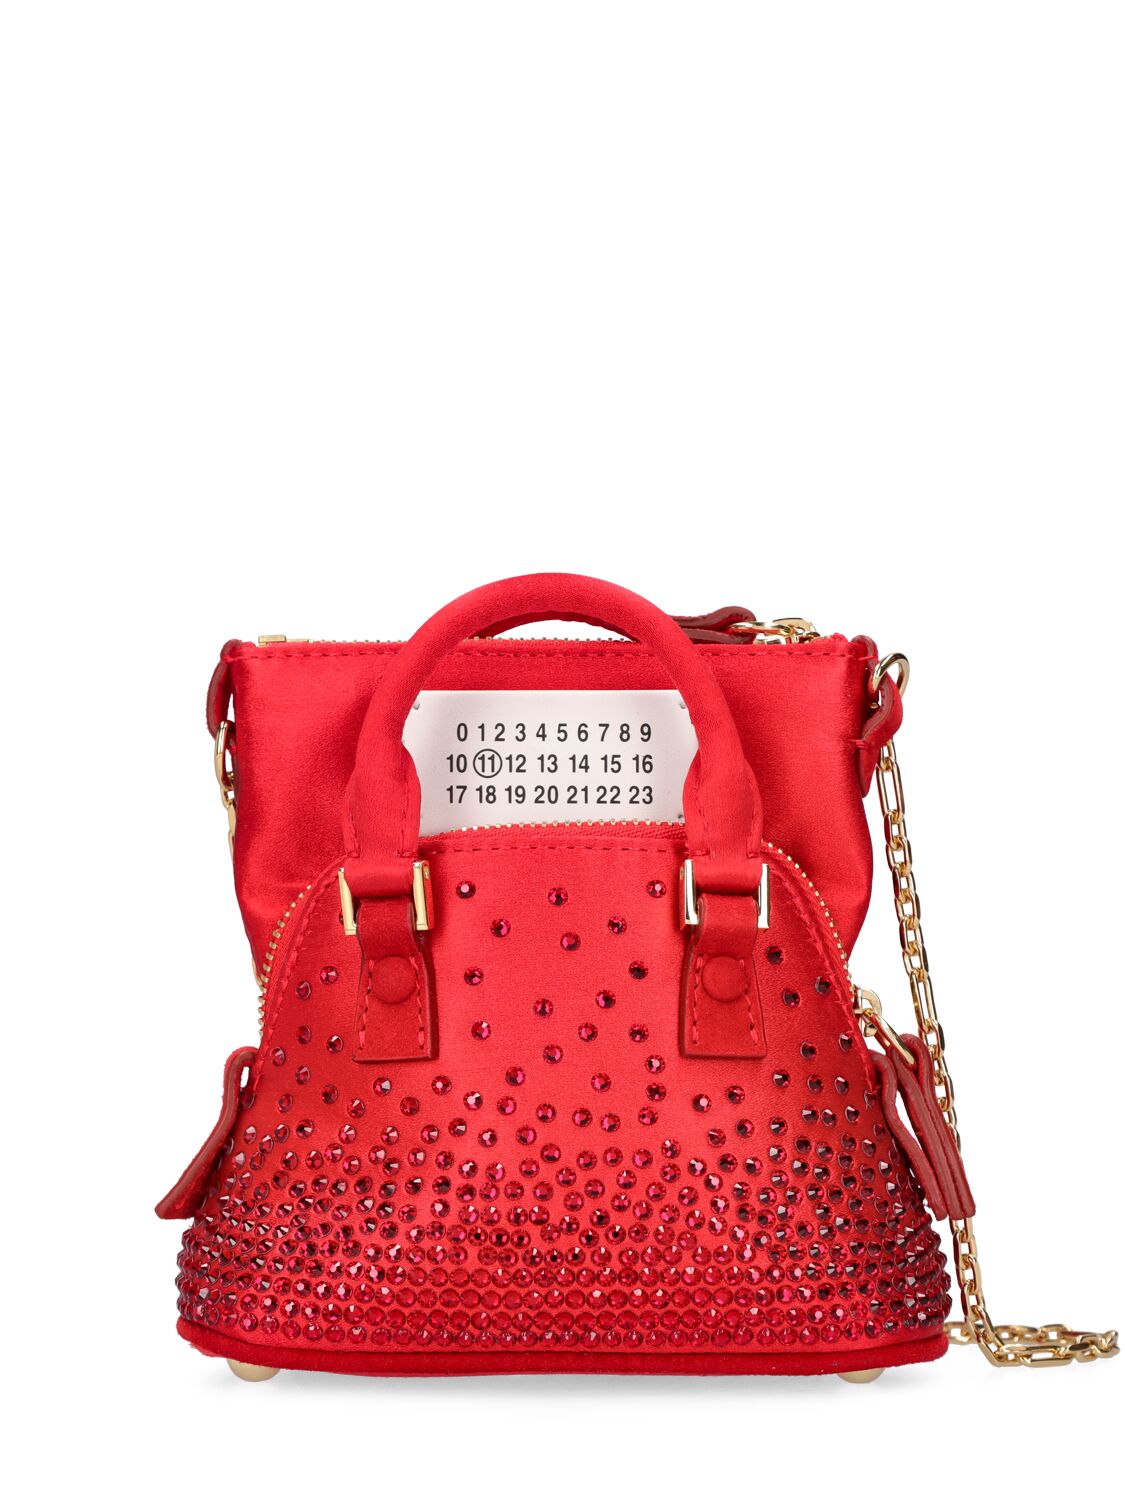 Shop Maison Margiela 5ac Baby Classique Satin Bag W/crystals In Poppy Red